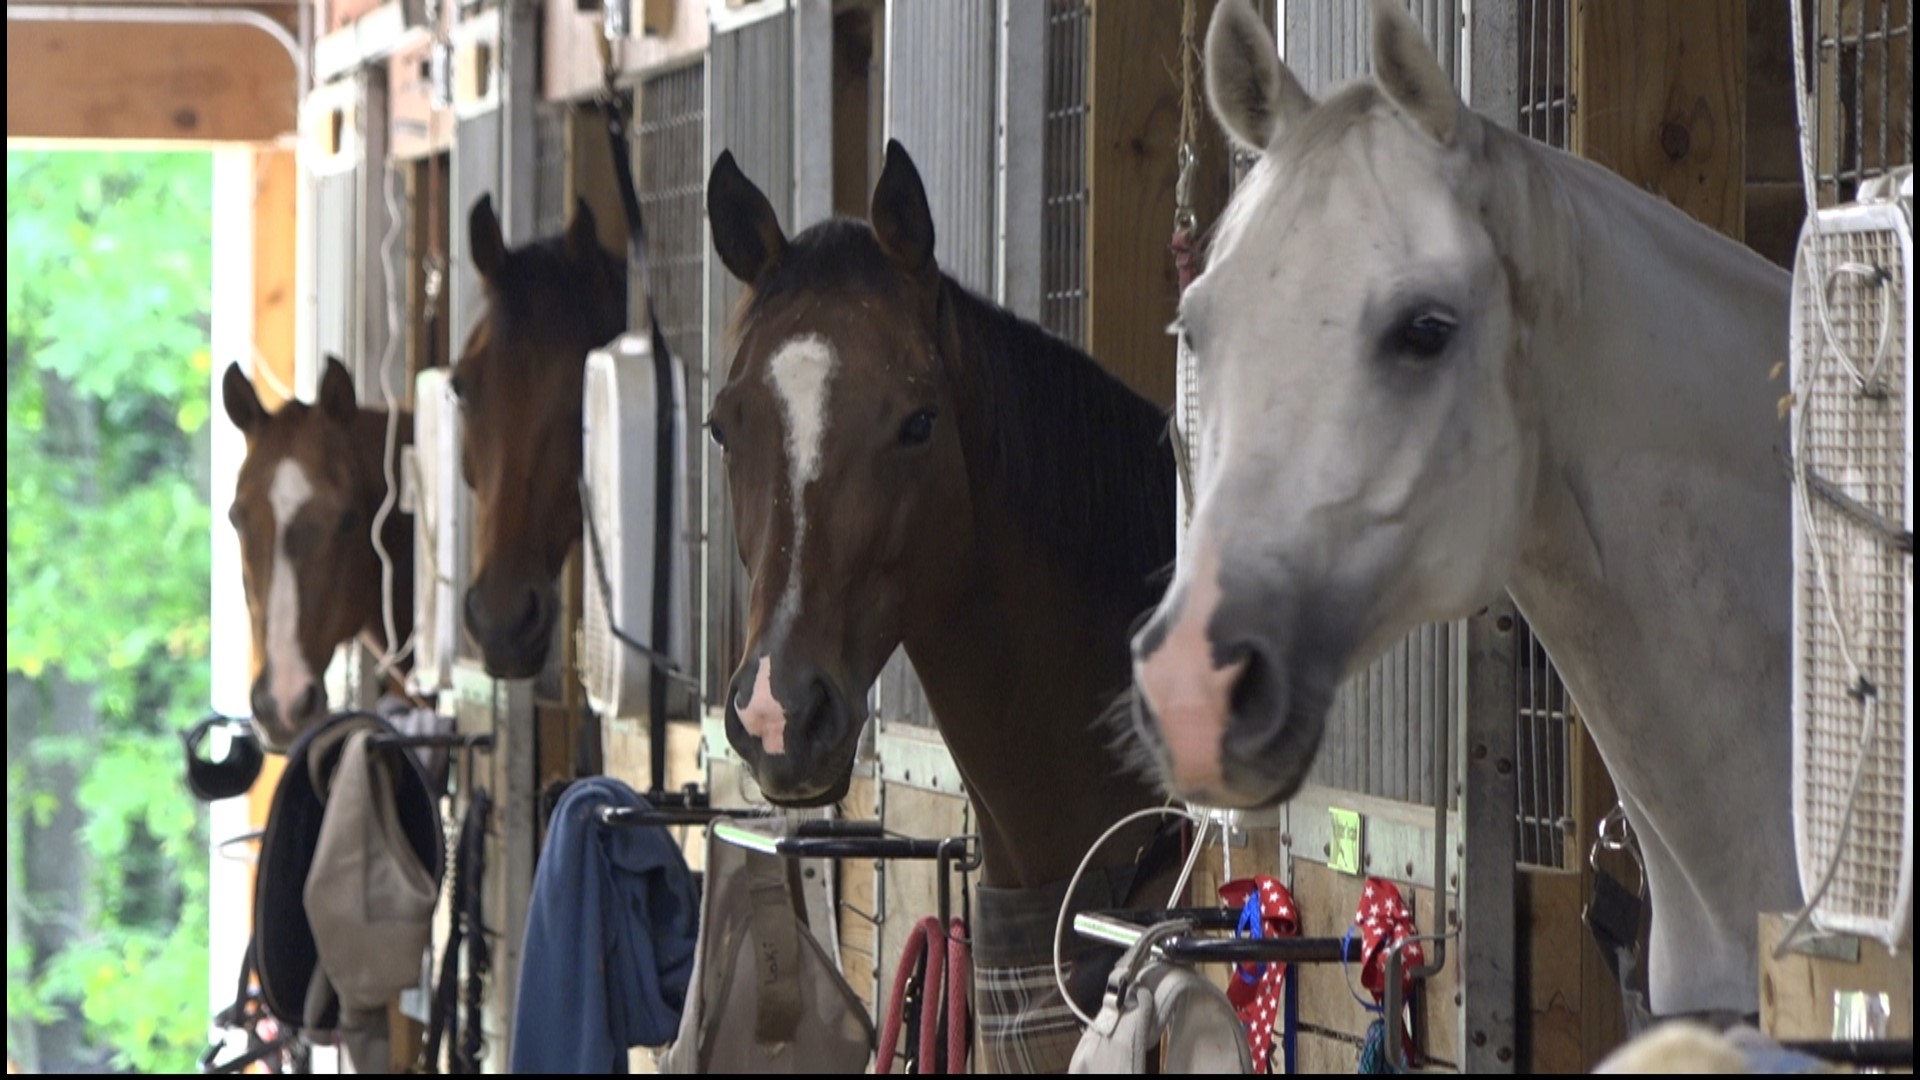 The Barn for Equine Learning uses horses to aid in therapy practices, often reaching breakthroughs traditional therapy cannot.